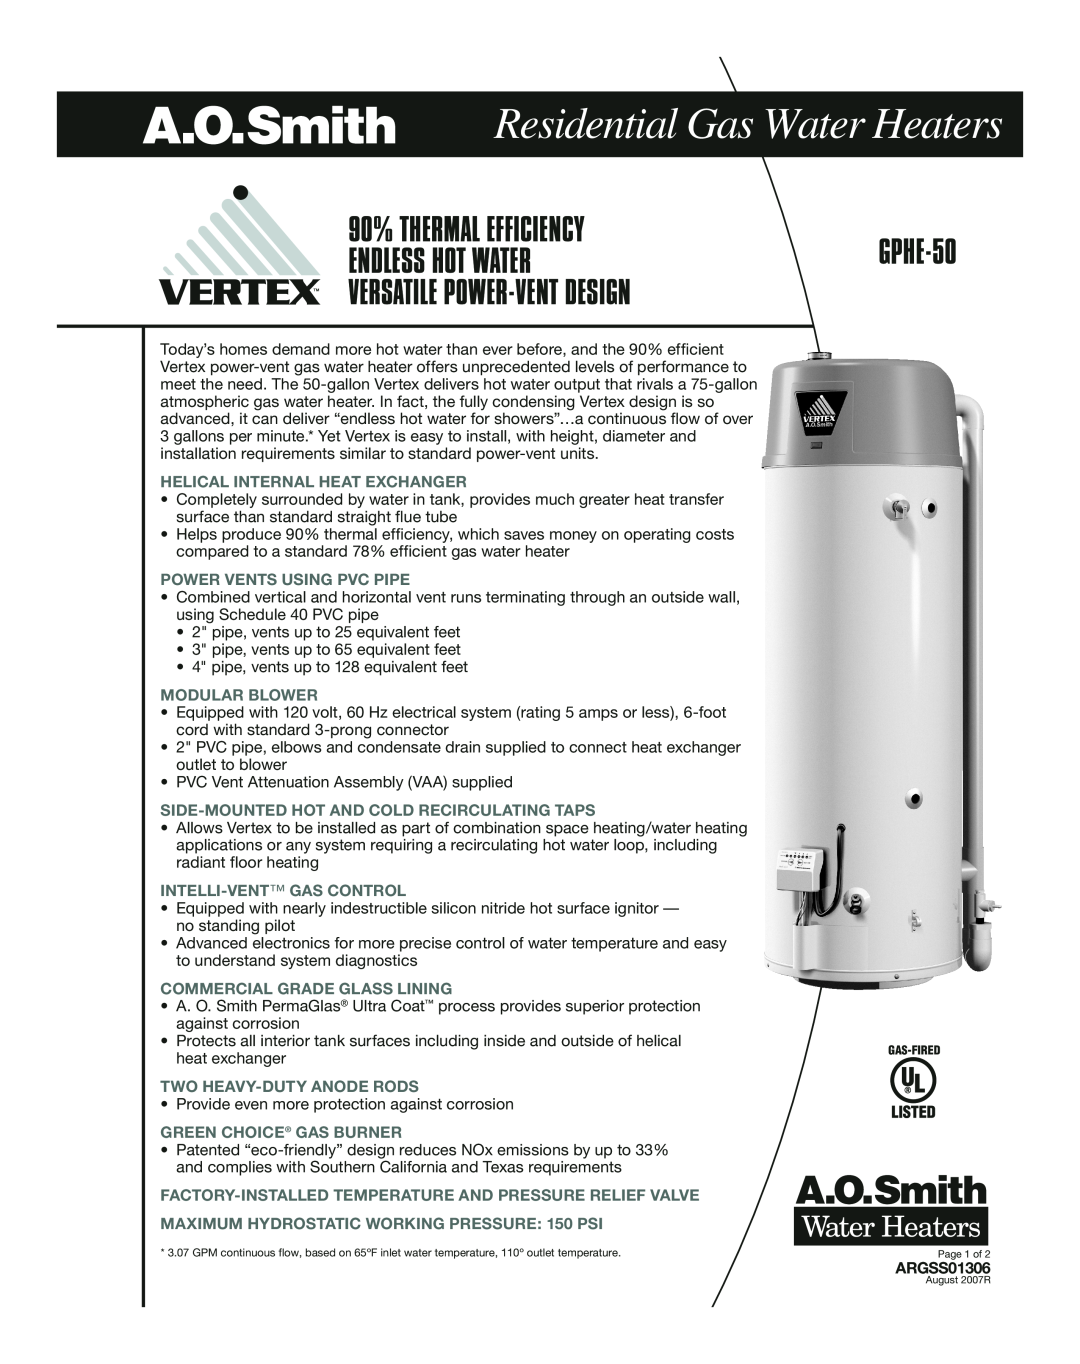 A.O. Smith GPHE-50 manual Residential Gas Water Heaters 